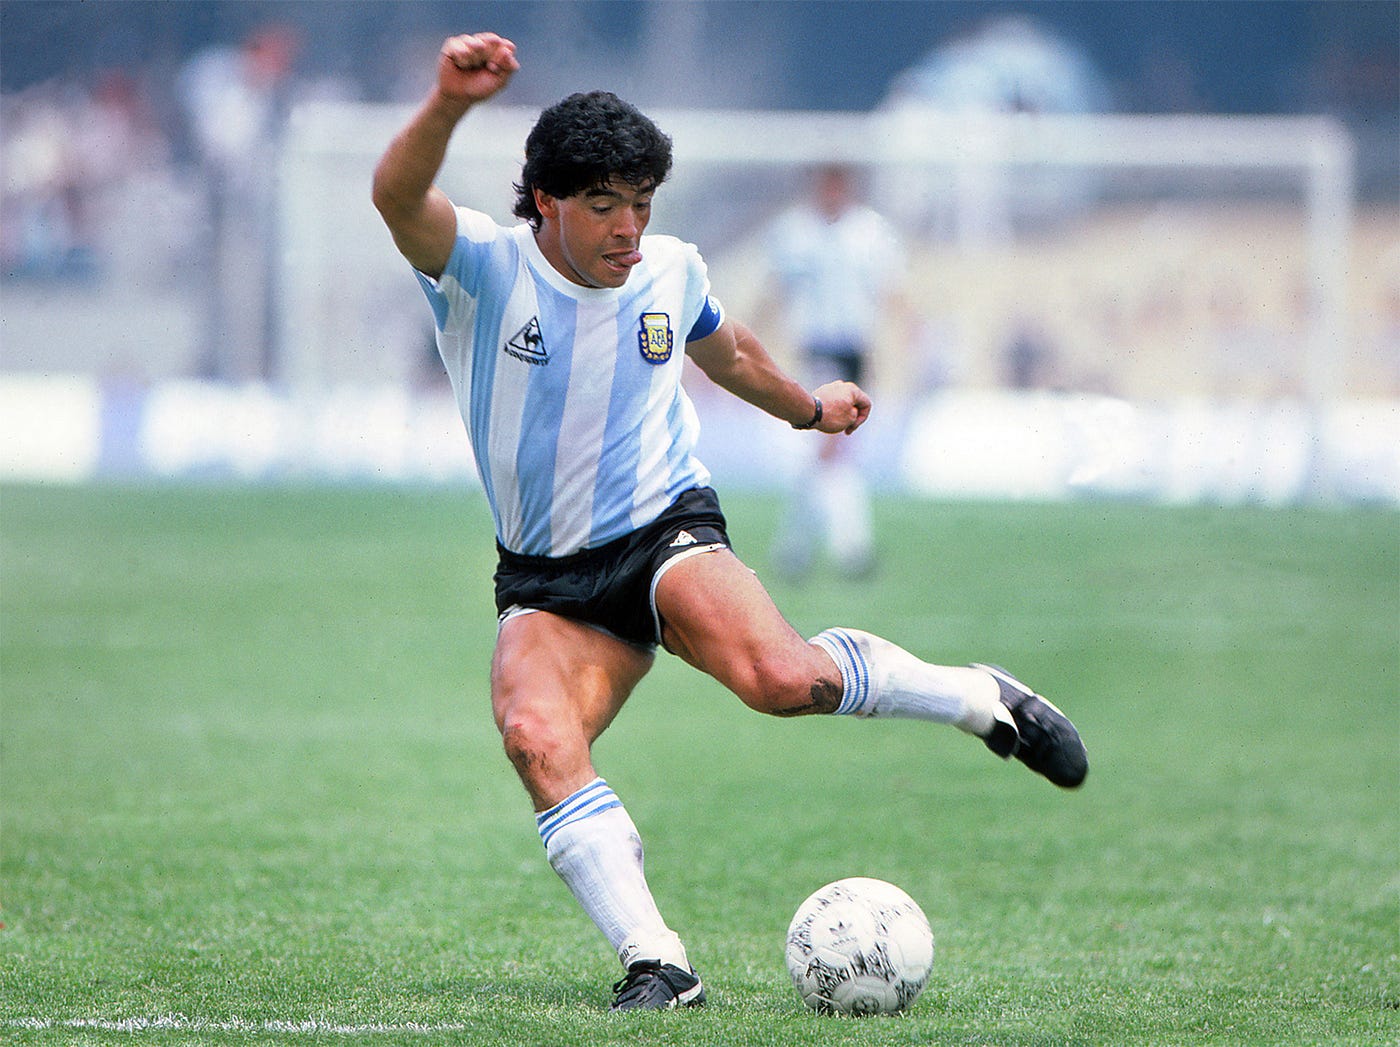 How much would Maradona, Pele and Zidane be worth in today's